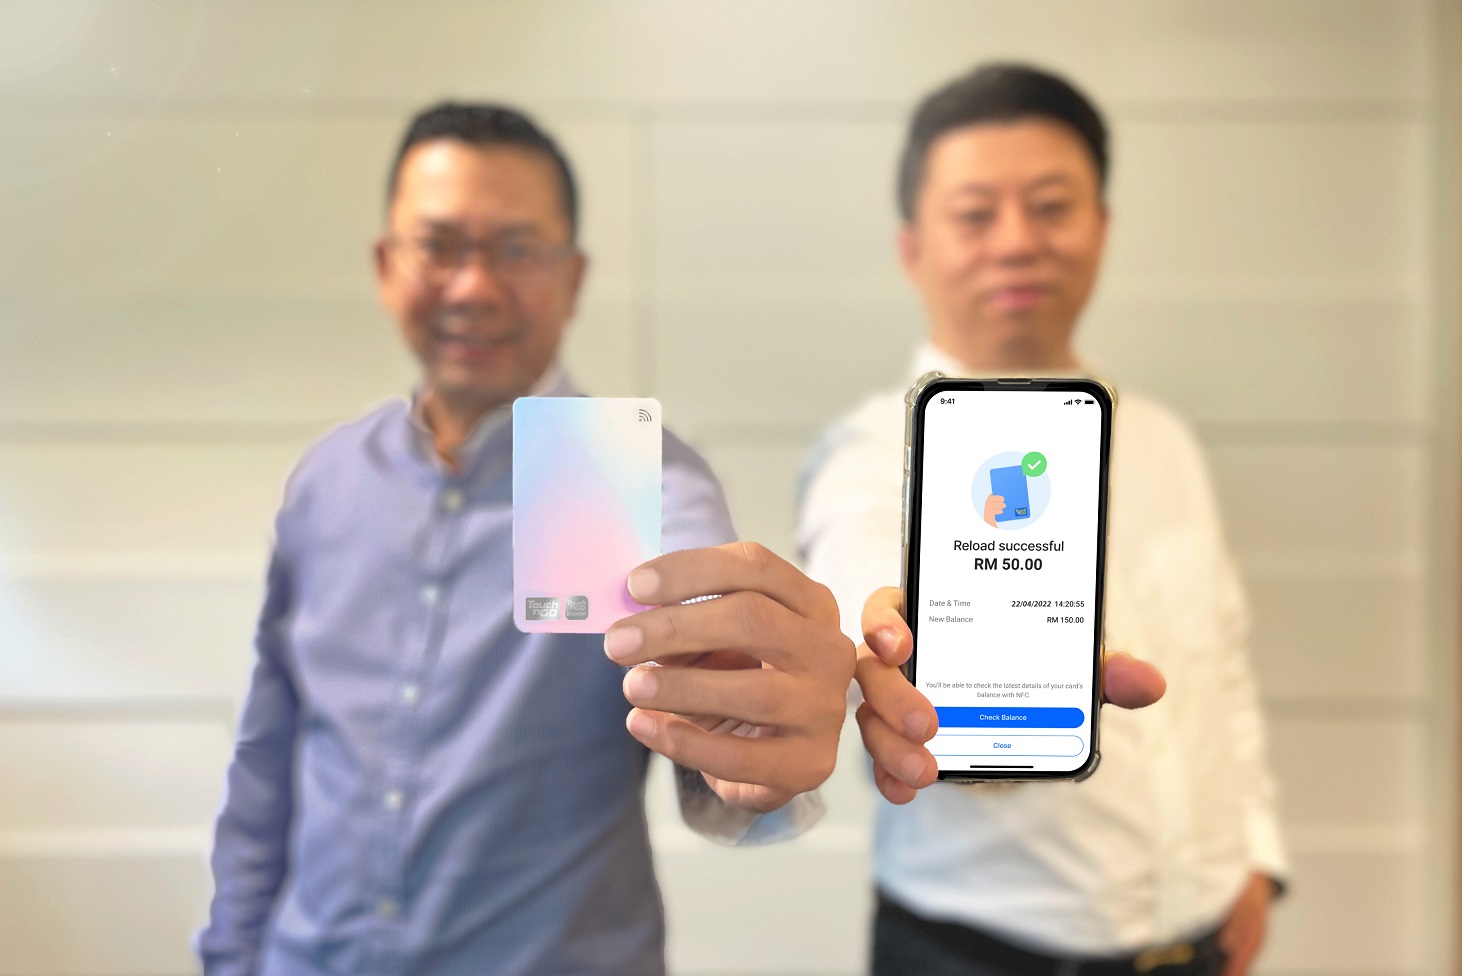 Touch ‘n Go Group Launches Upgraded Touch ‘n Go Card Allowing Zero-Surcharge Reloads from Mobile Devices